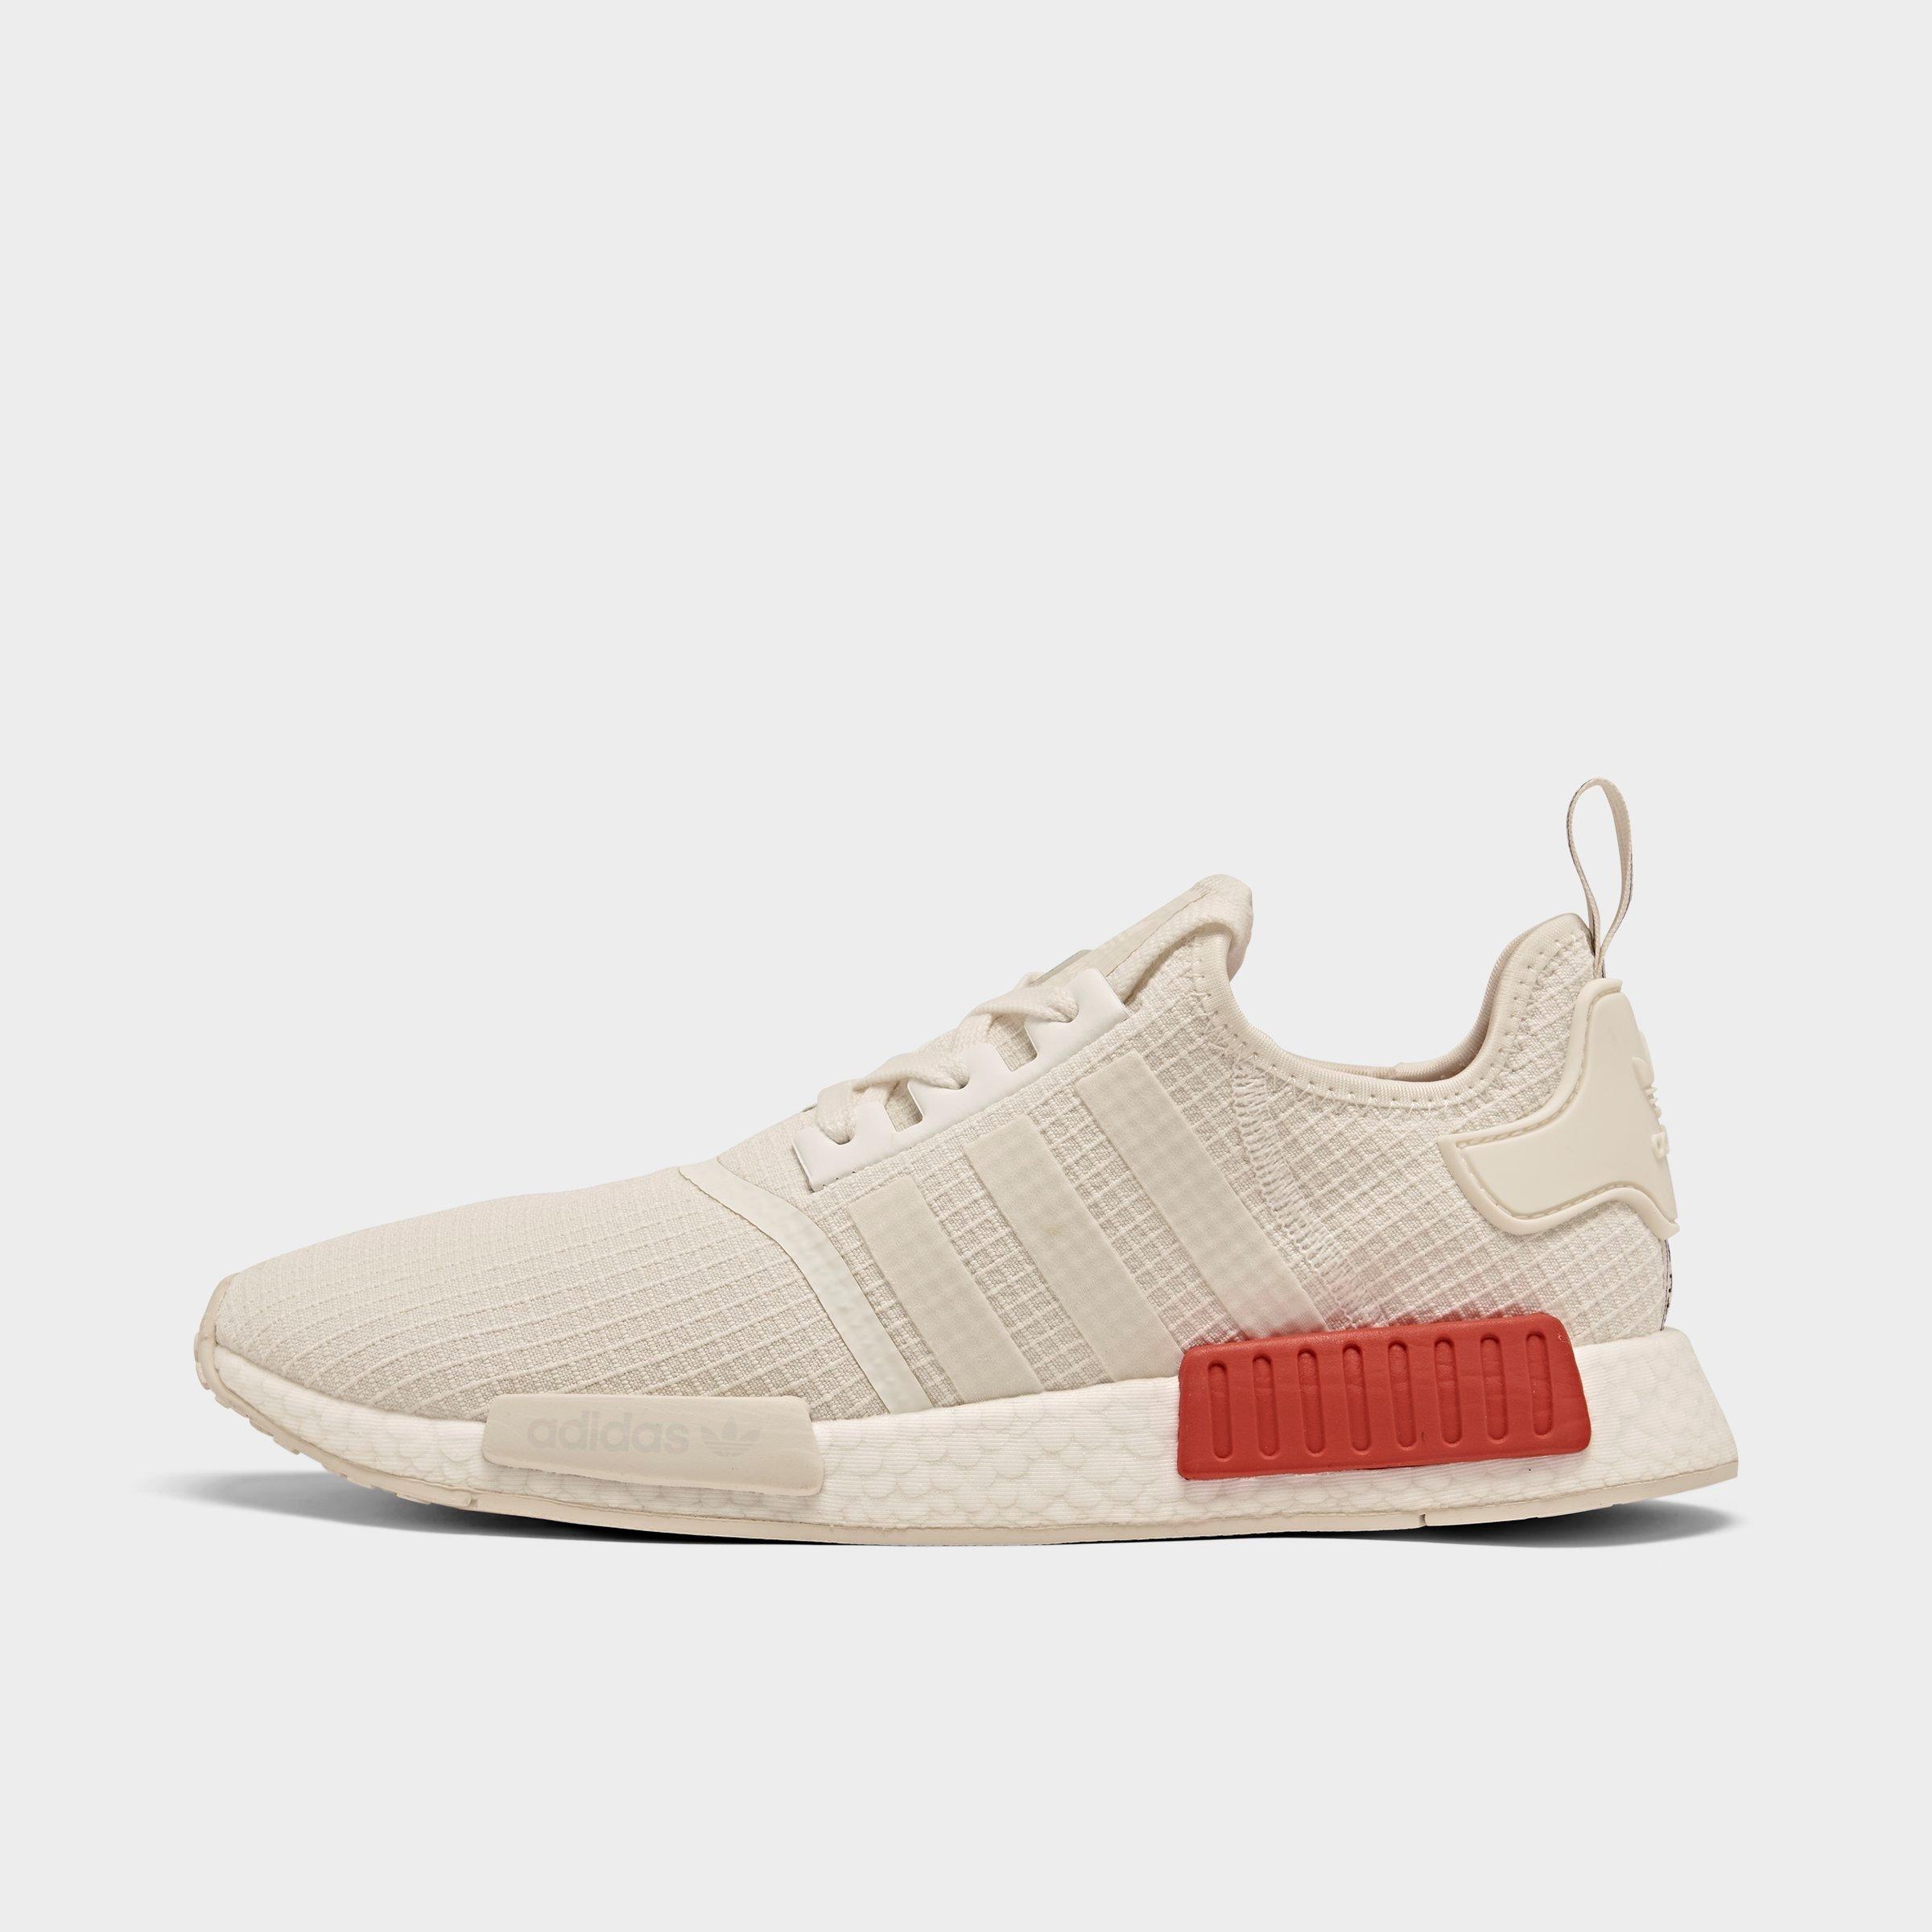 nmd size 2